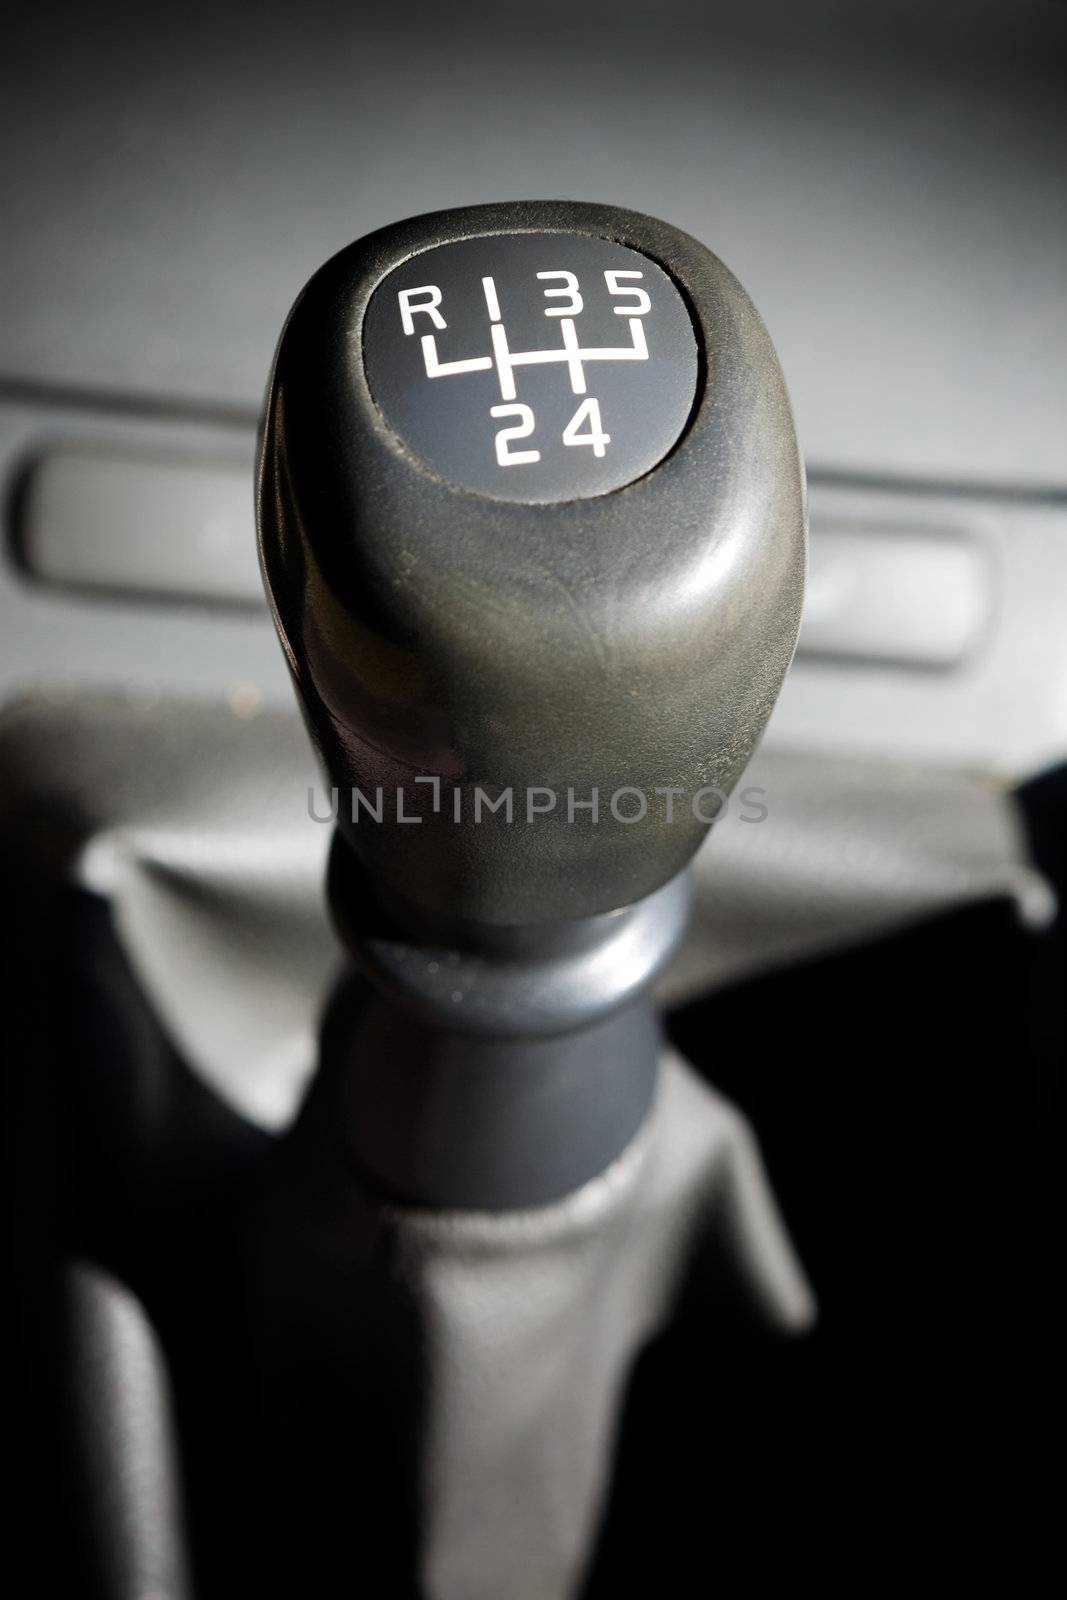 A gear shifter with 5 speeds in an older car